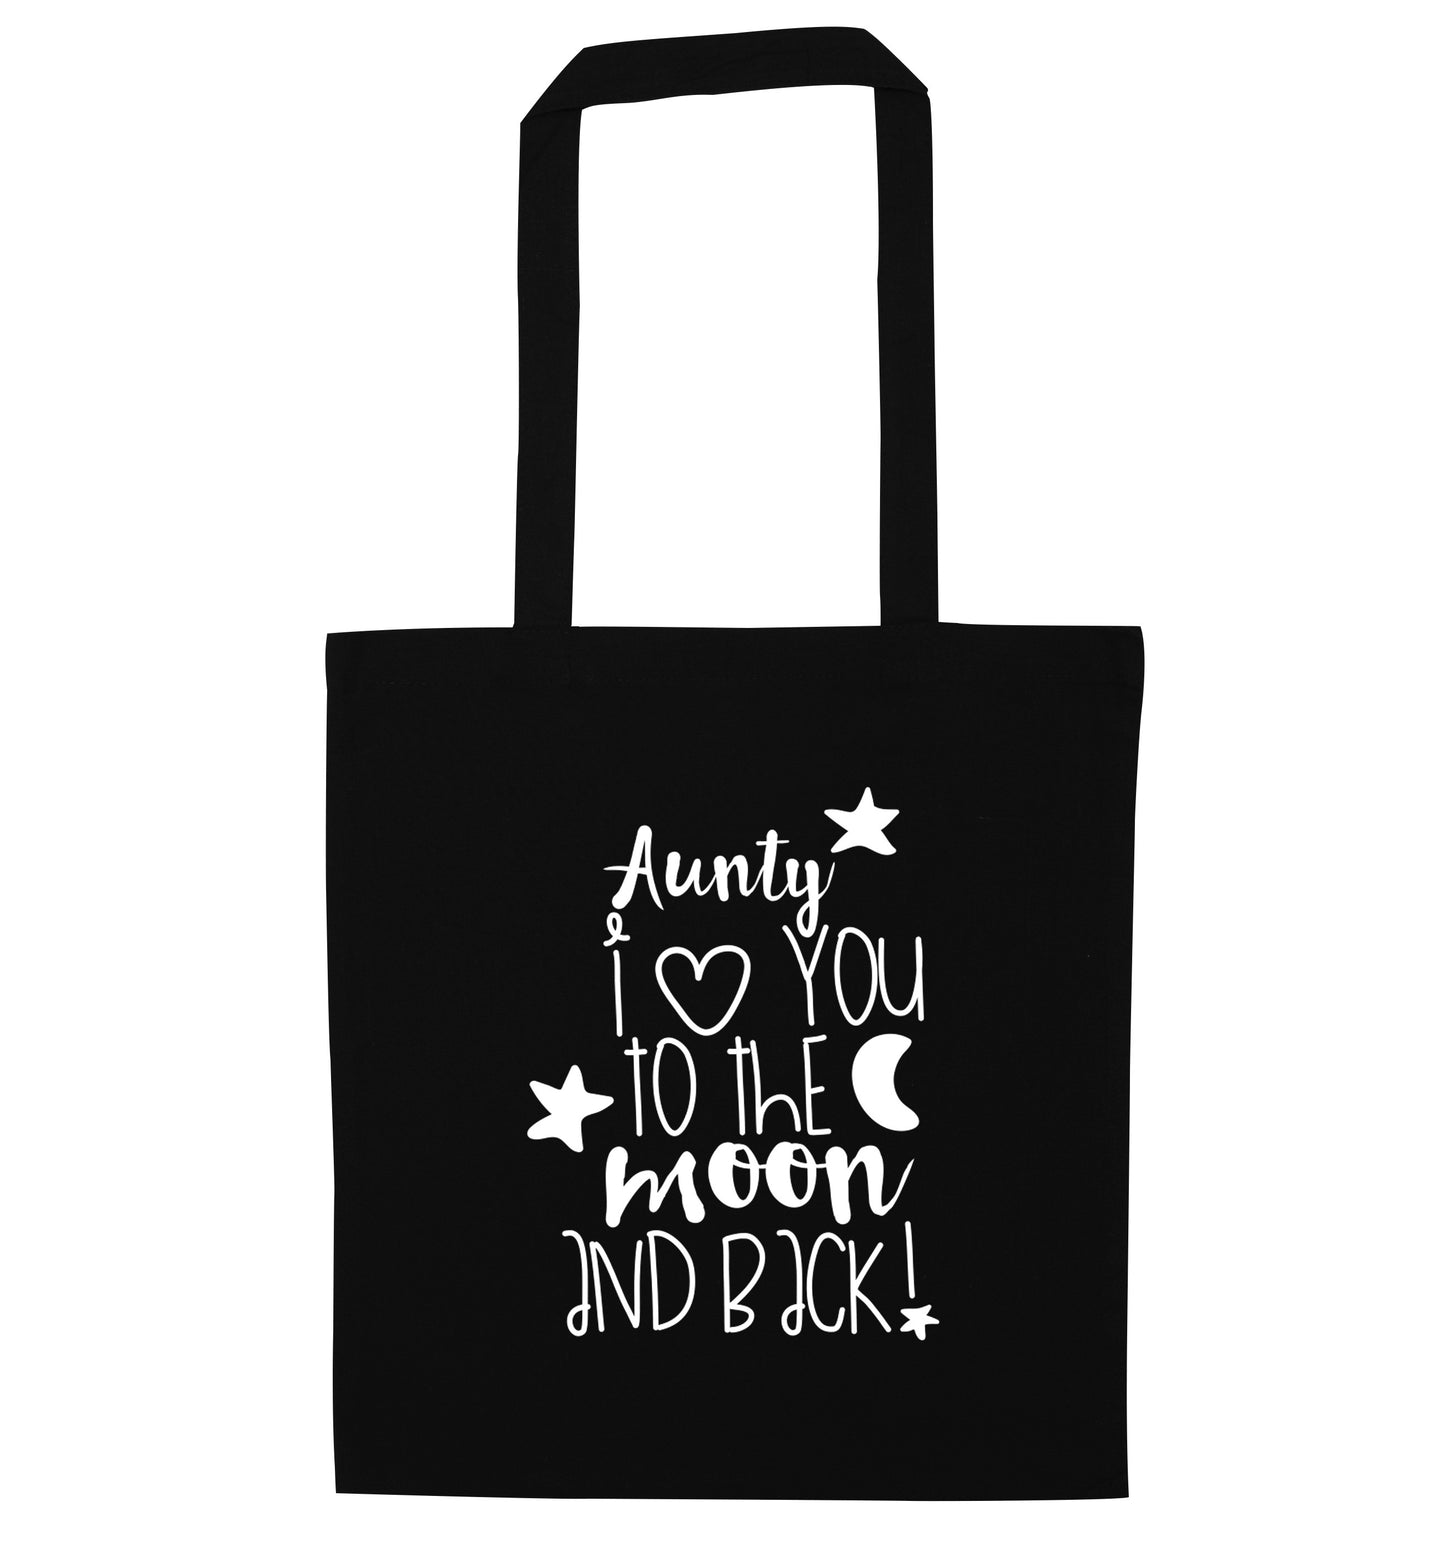 Aunty I love you to the moon and back black tote bag